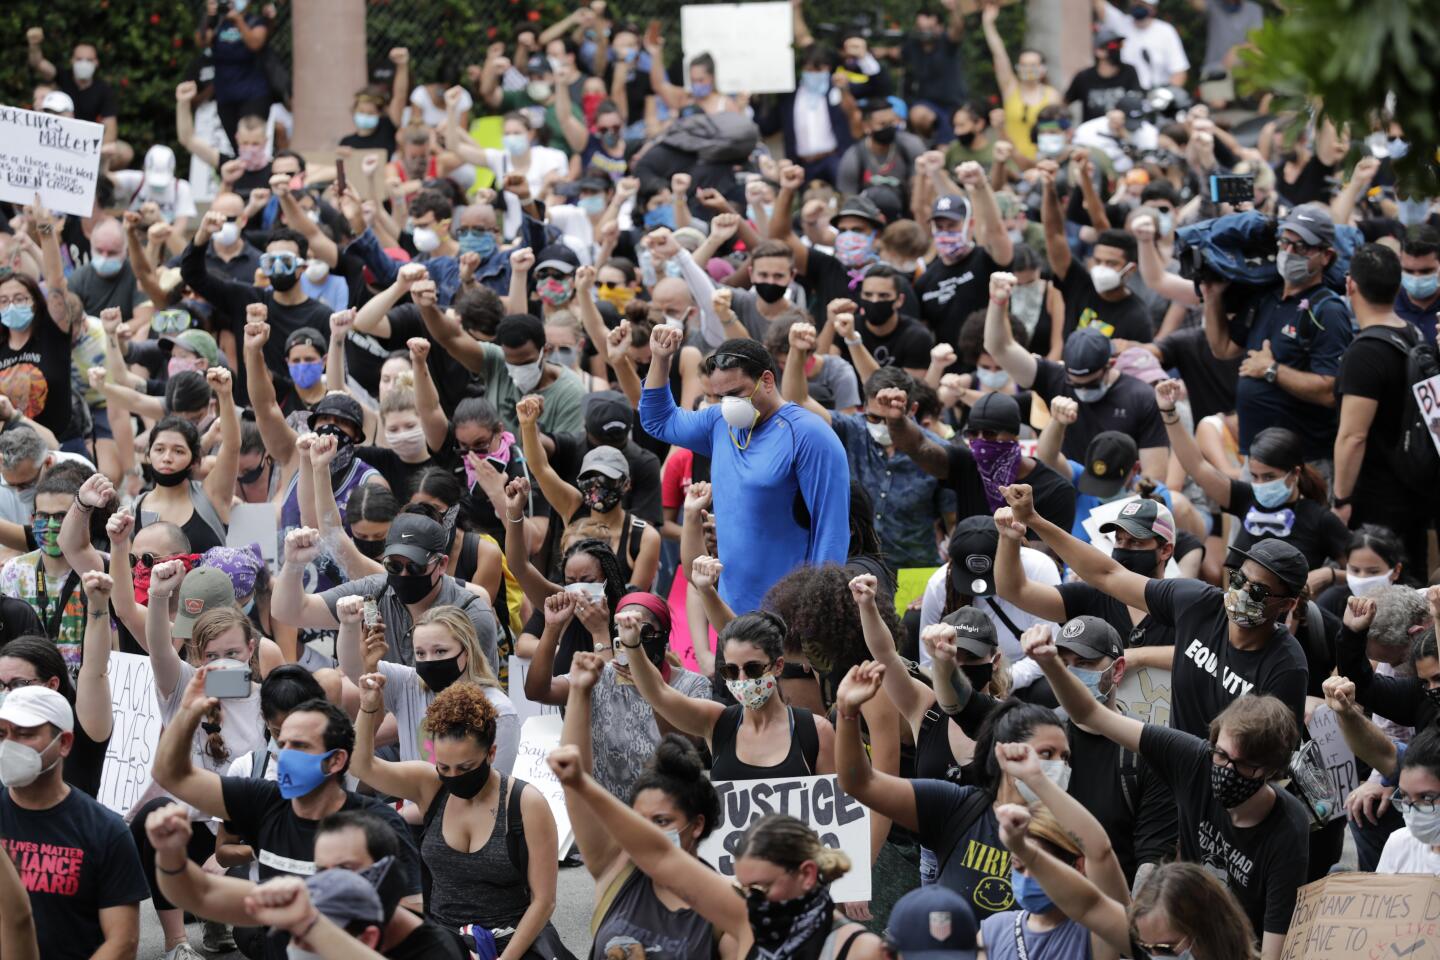 People raise their fists during a protest over the death of George Floyd, Saturday in Miami.